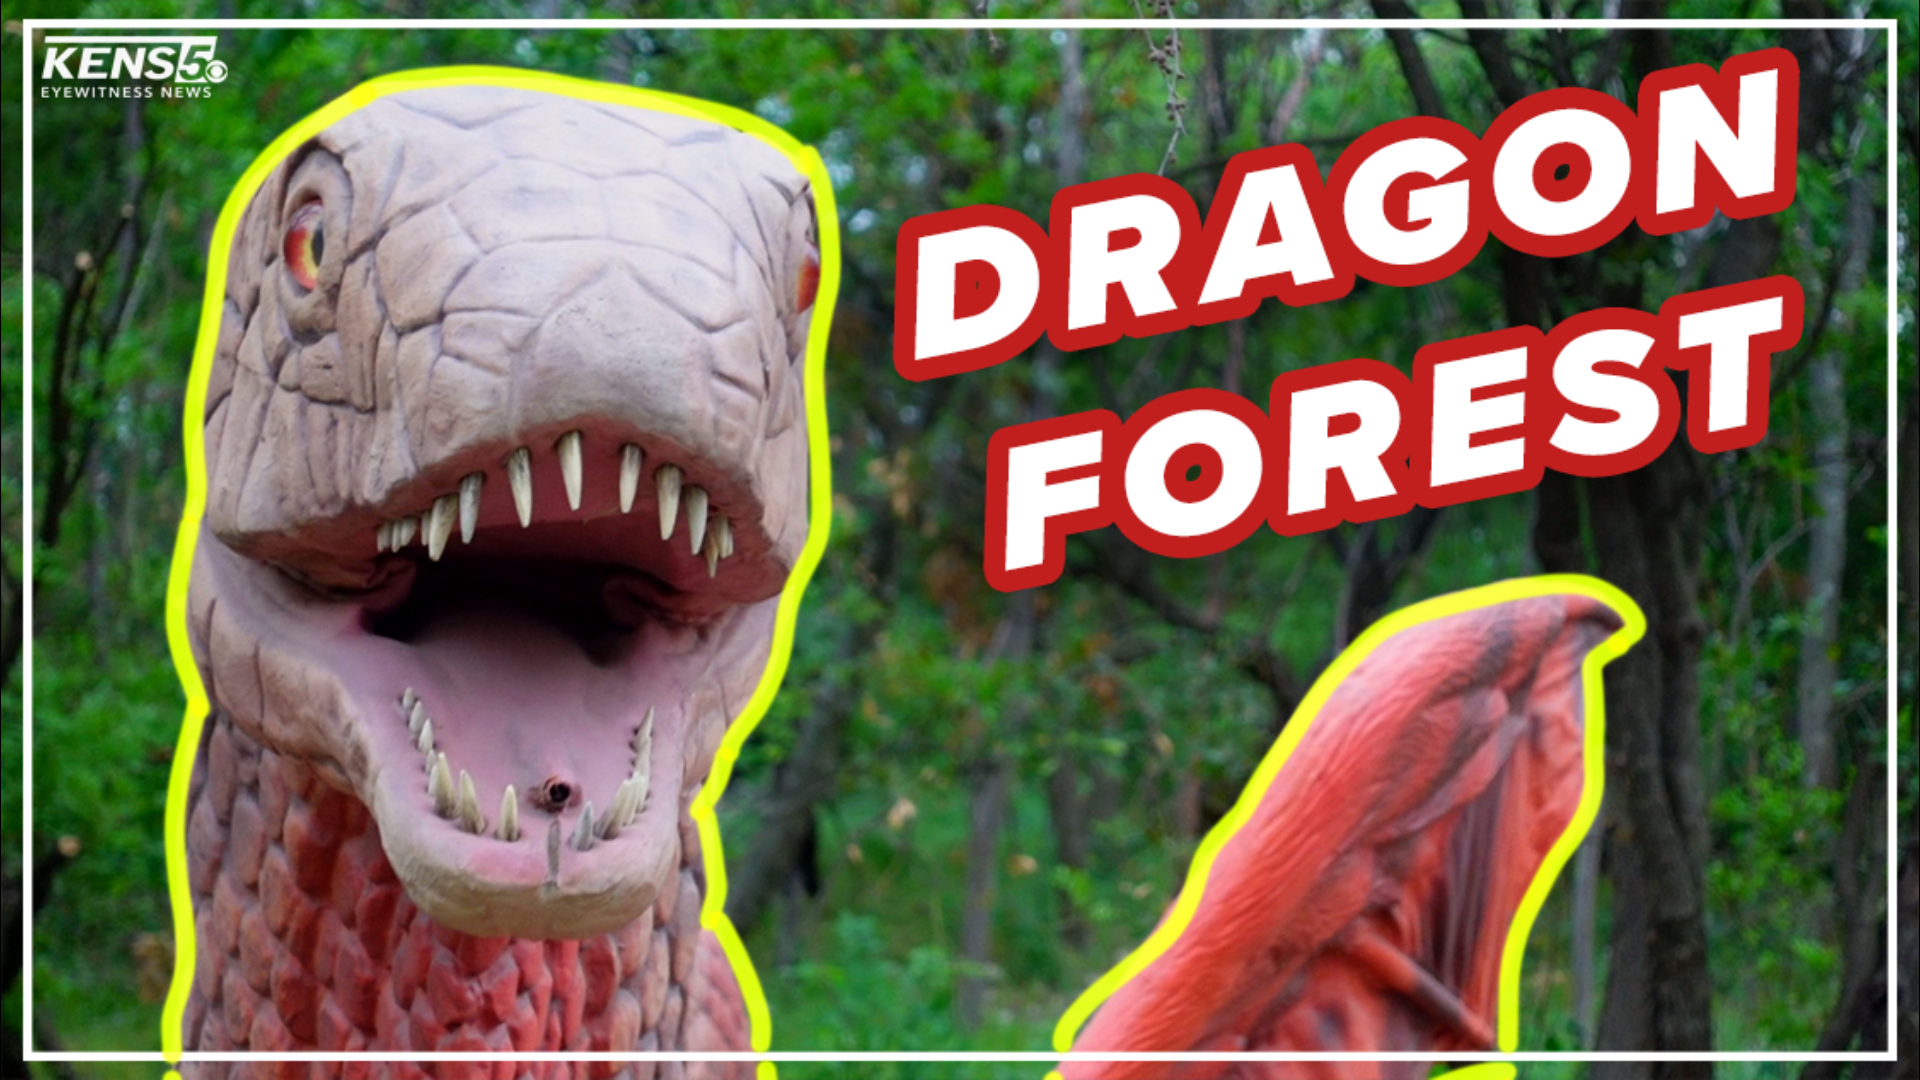 The new Dragon Forest installation at the zoo brings a little bit of a fantasy to a familiar Alamo City attraction.